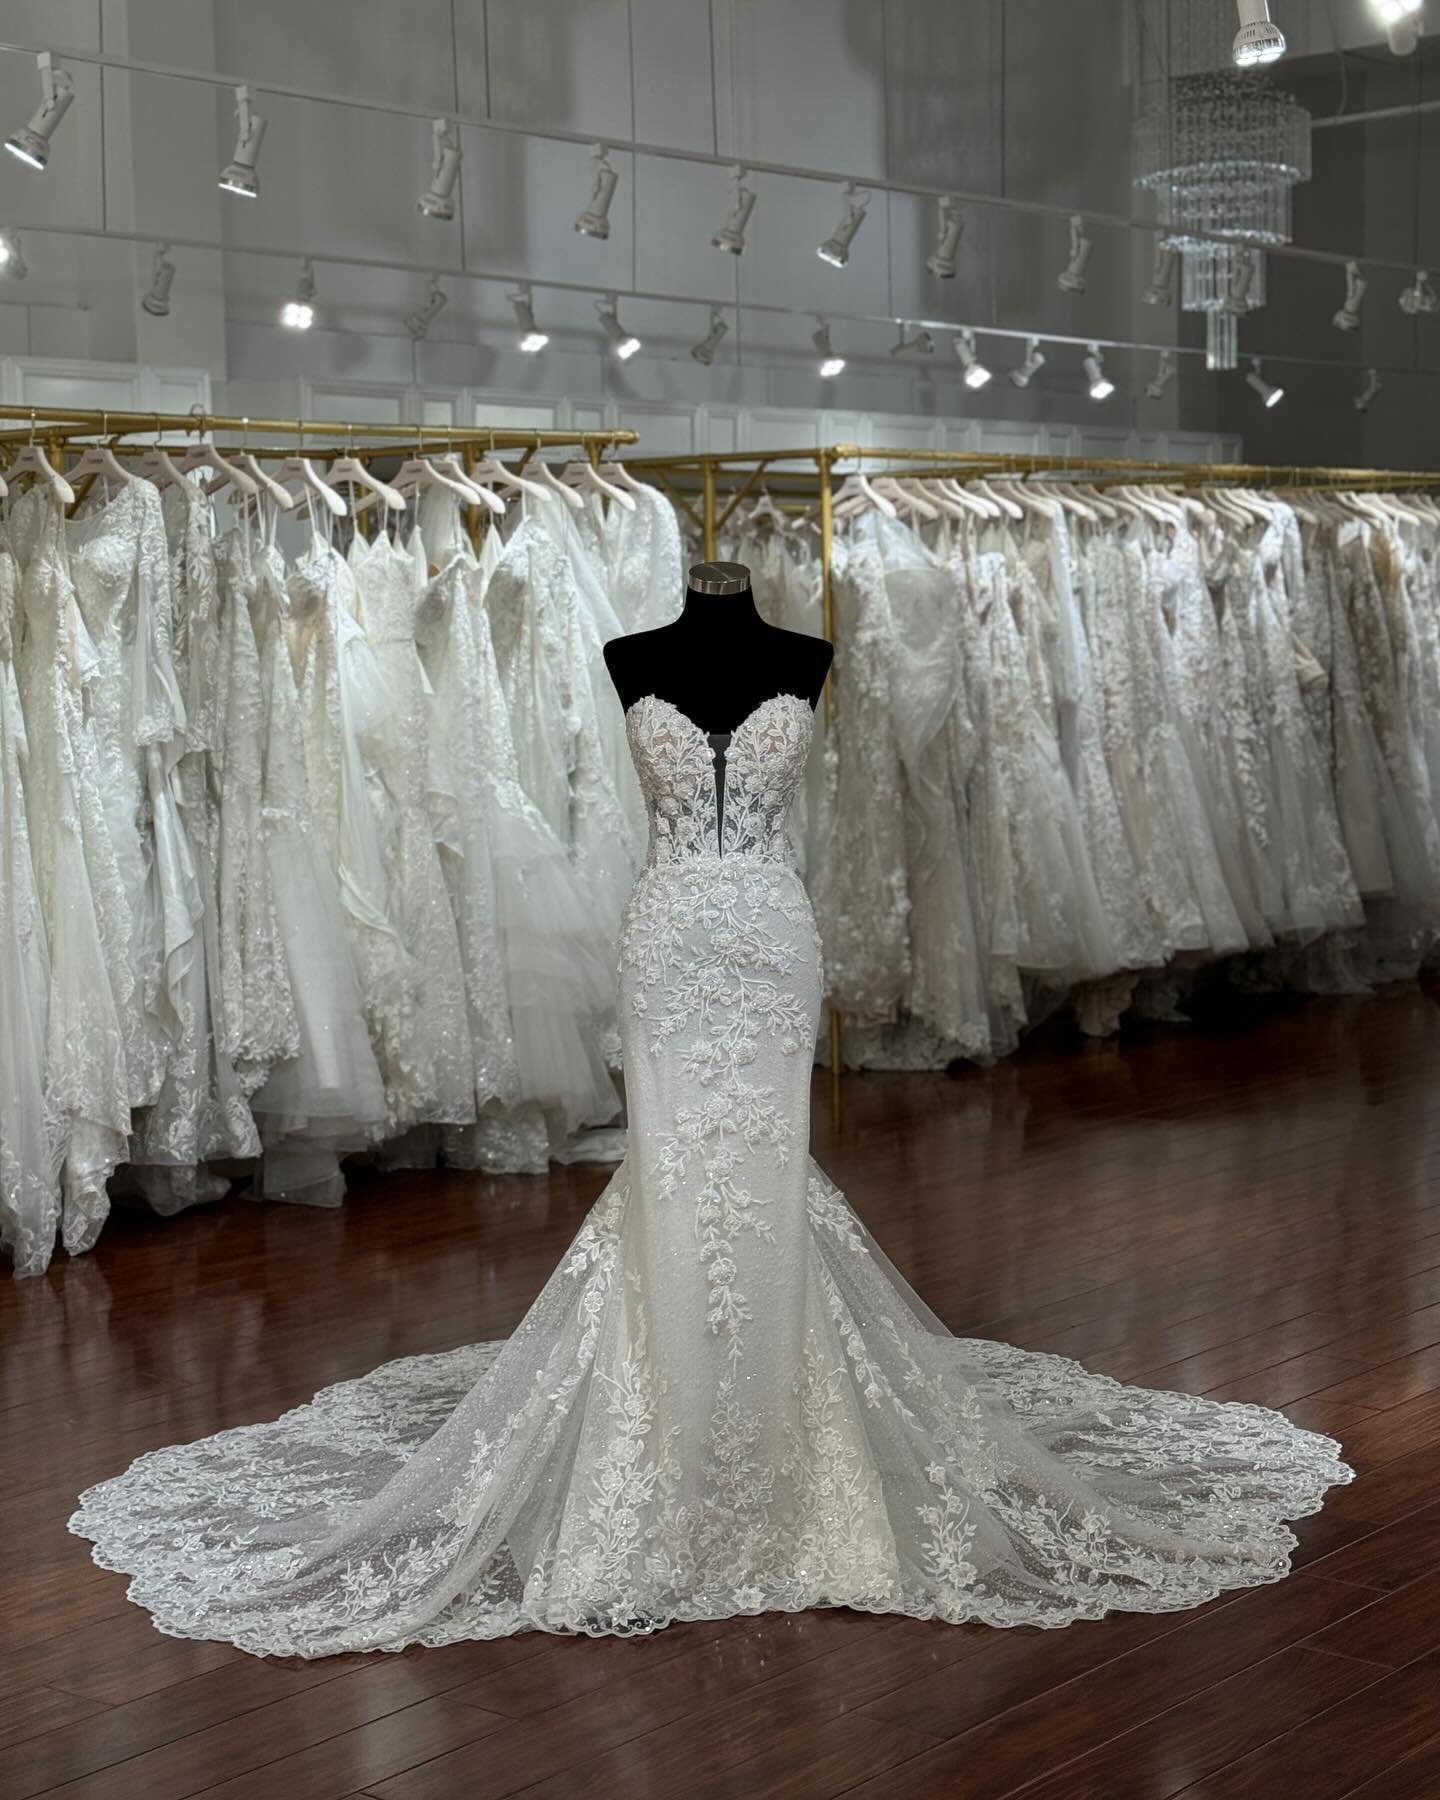 NEW ARRIVAL 🤍 FOLLOW FOR MORE!! 🔥 

🔗: http://lamourbridalboutique.com
BOOK YOUR FREE APPOINTMENT TODAY🤍 
#bridal #bride #bridetobe #bridestyles#bridedress #novia #vestidodenovia #vestidosdenovia #bridalboutique #boutique #boutiqueshopping #fyp #